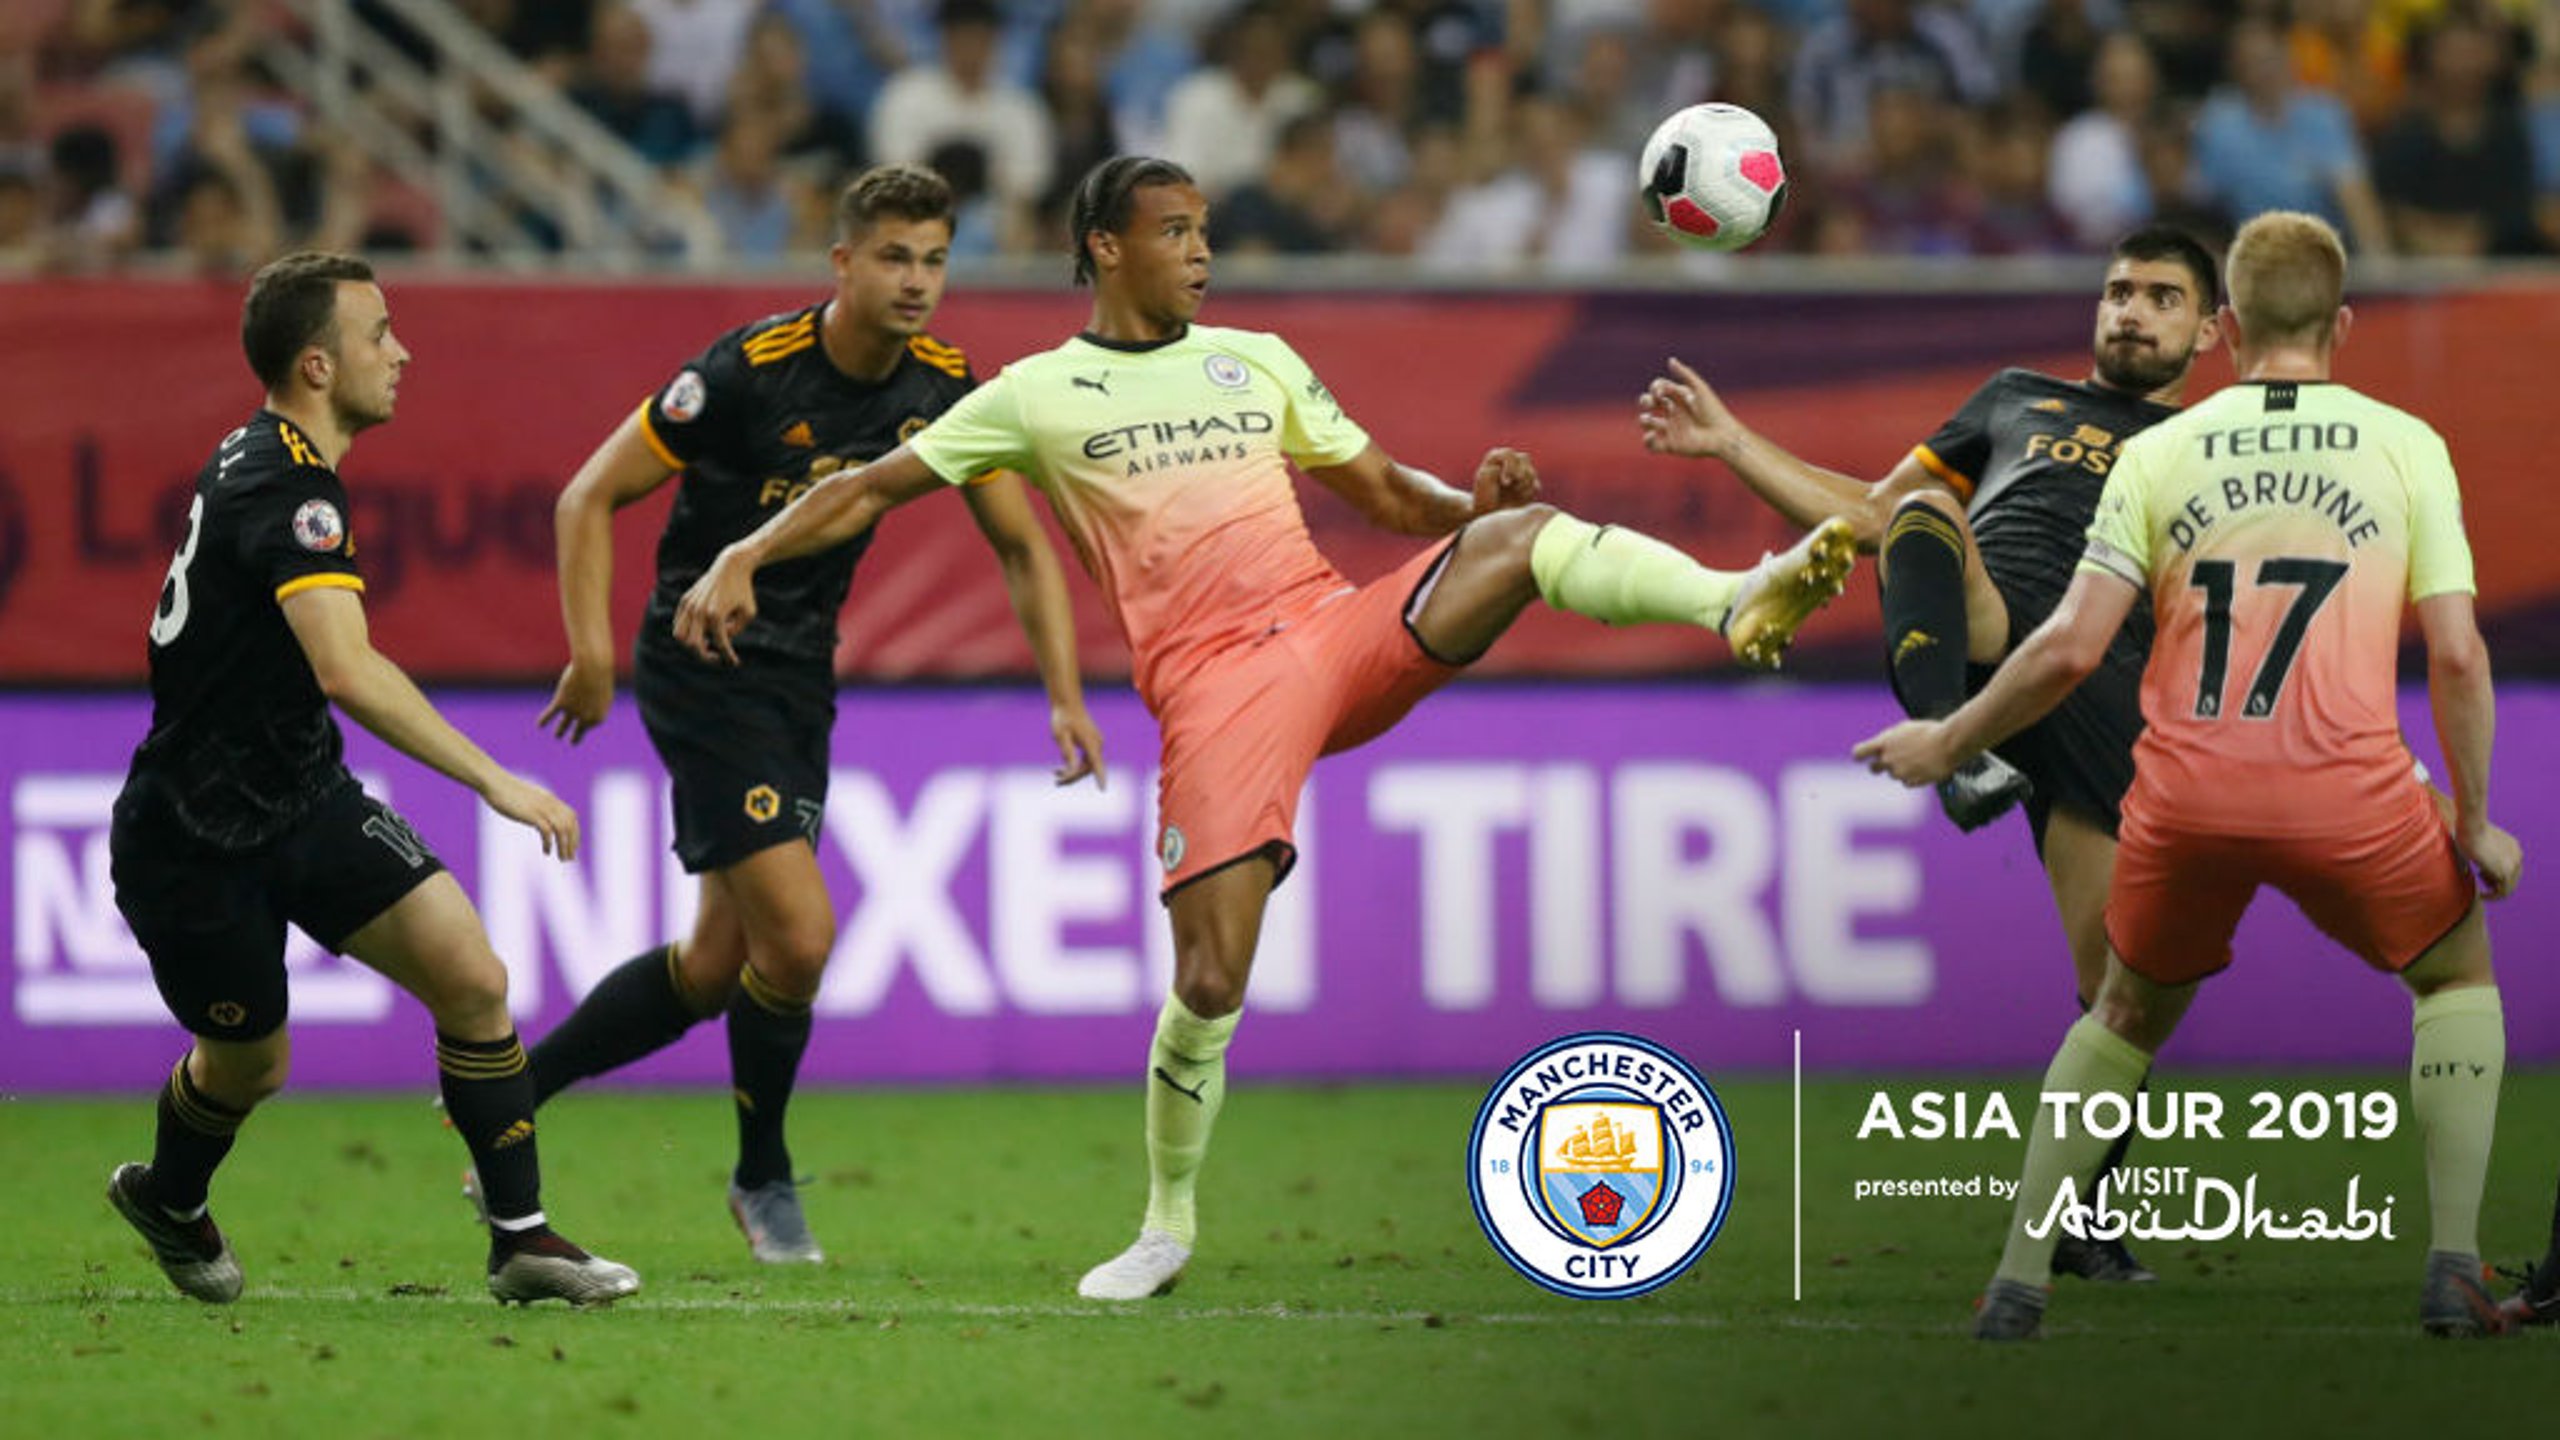 ASIA TROPHY: City were beaten on penalties in this year's final in Shanghai